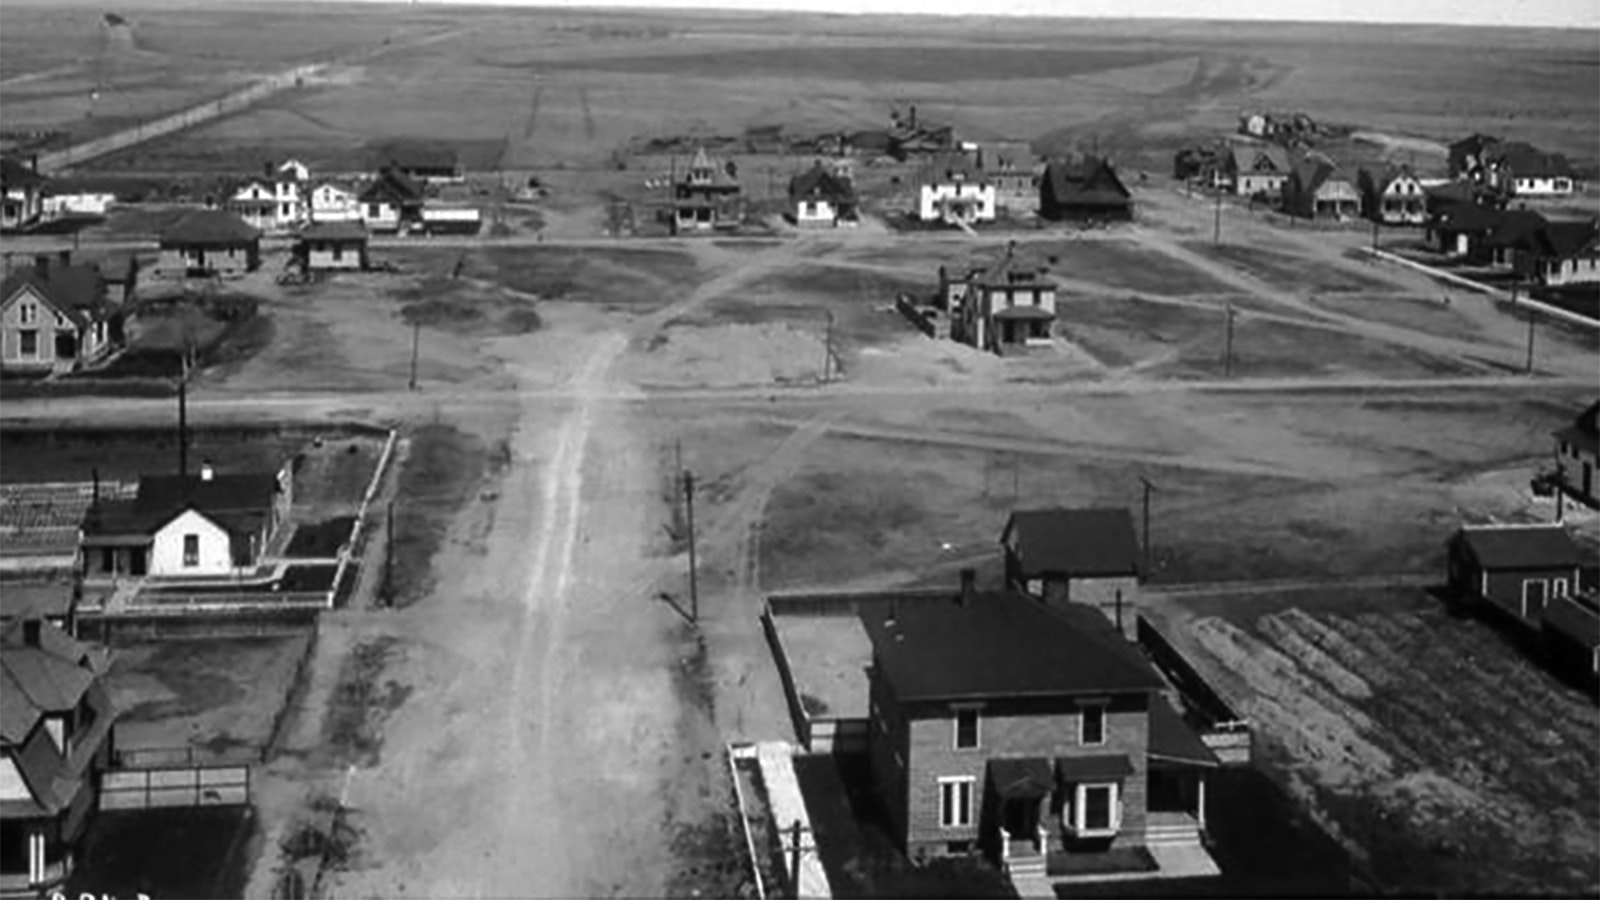 Cheyenne looking north from the Wyoming Capitol in 1888 shows a wide-open, treeless space.